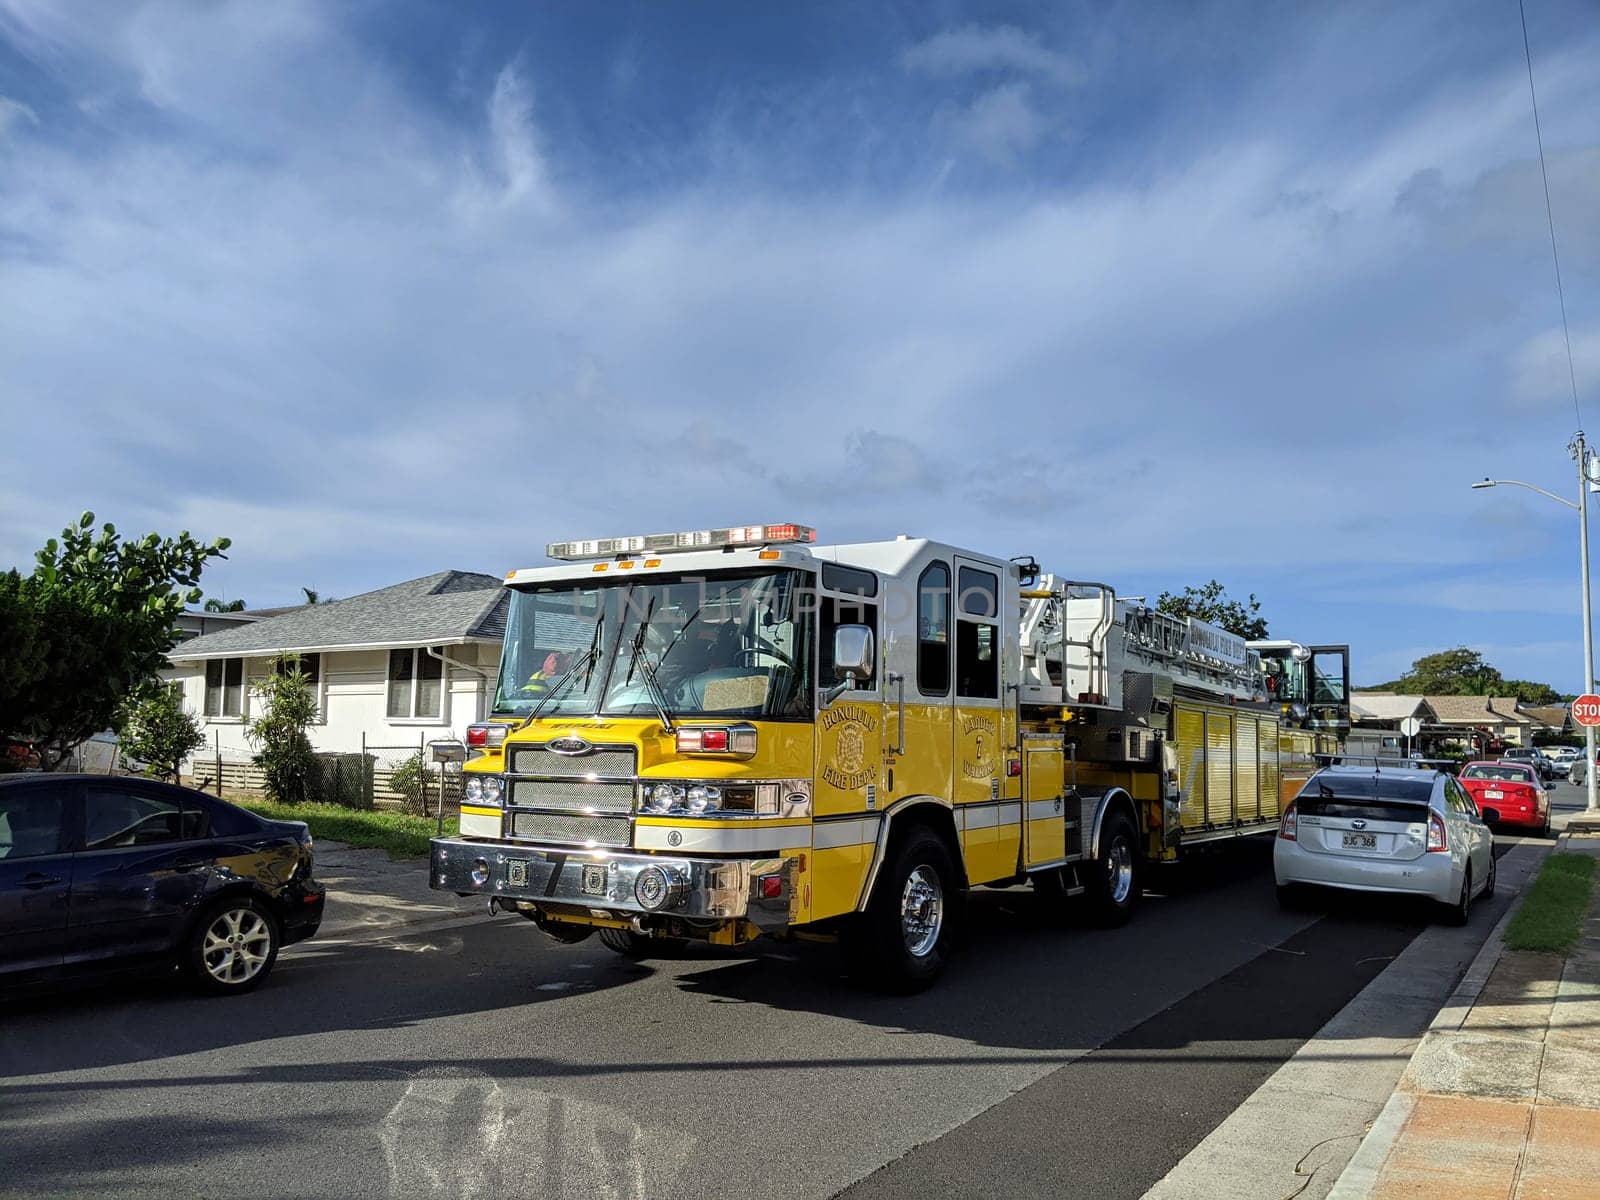 Honolulu - November 10, 2020: A fire truck driving down a small street in the Kapahulu neighborhood of Honolulu, Hawaii. The photo shows the yellow truck with a ladder on top, and the cars and houses on the sides of the street. The photo is taken from a low angle, creating a sense of movement and urgency.